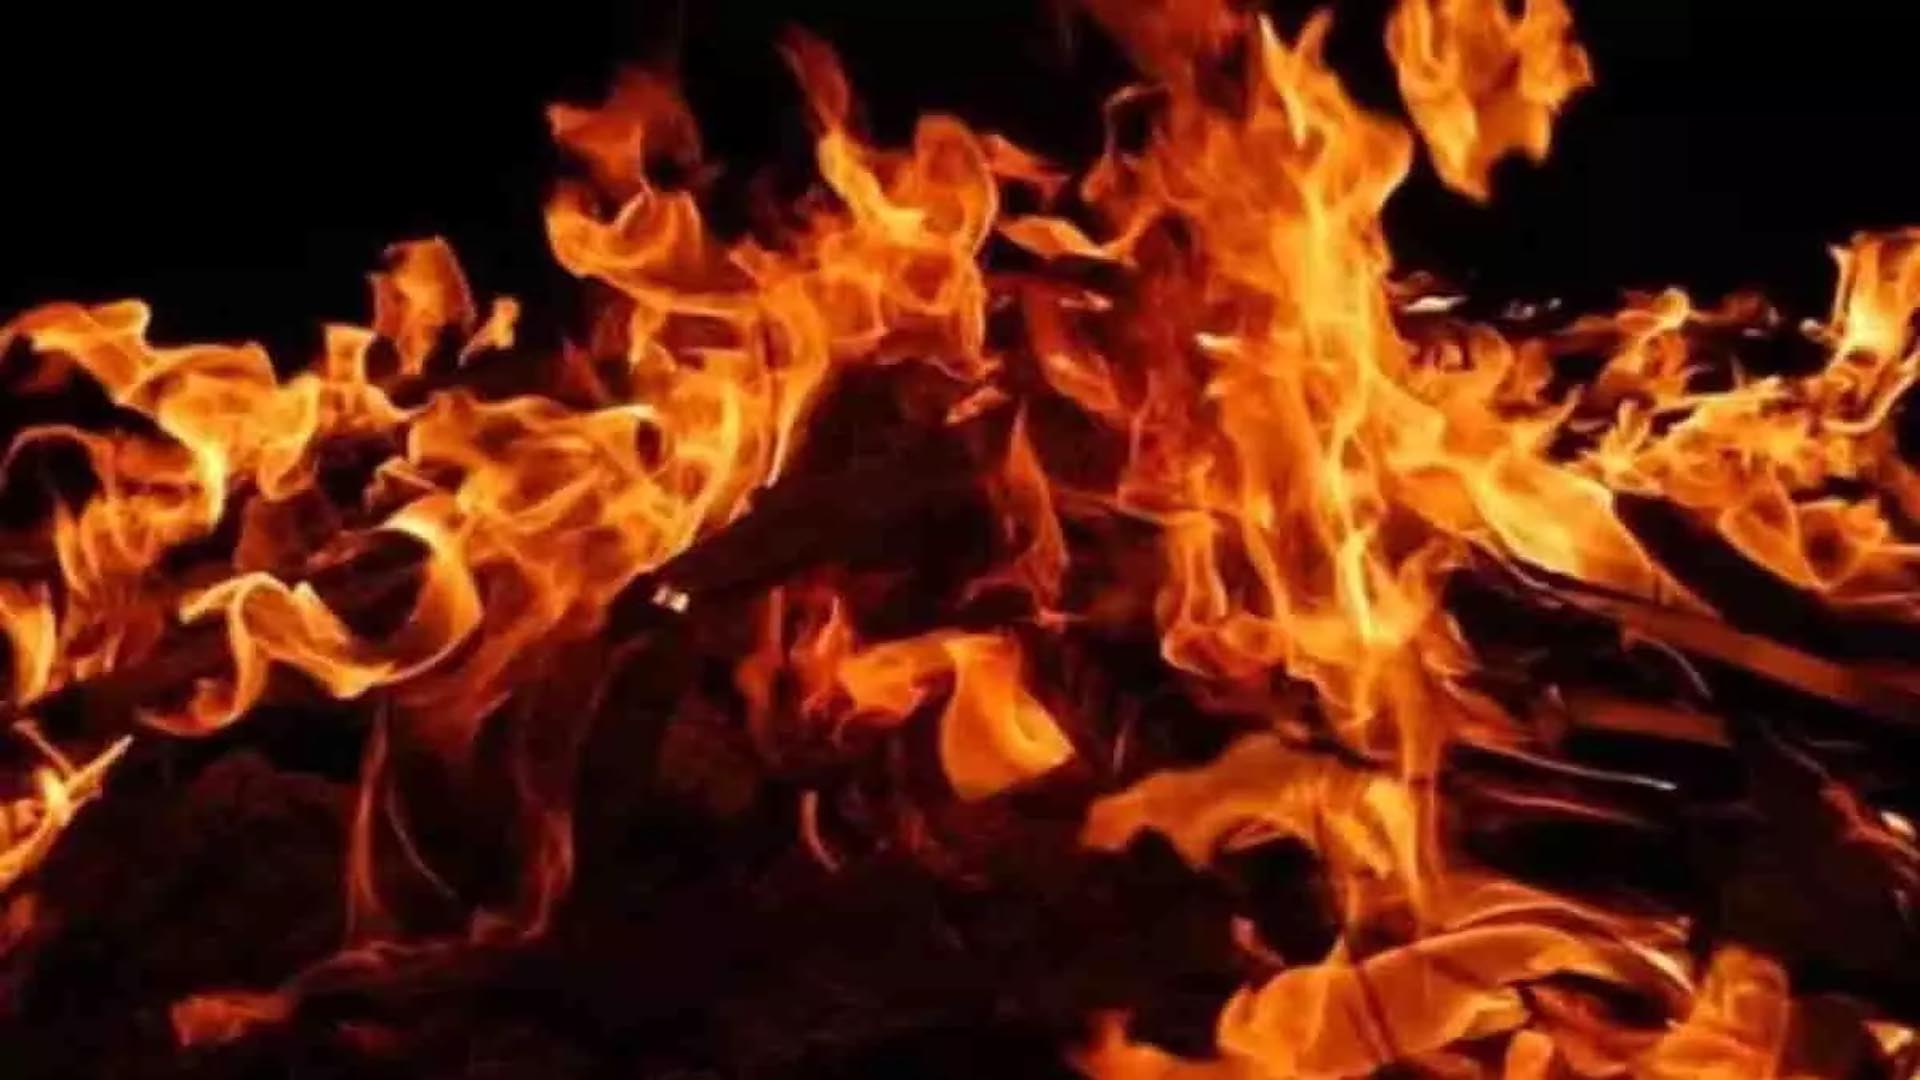 Wife burnt herself alive, died early in the morning